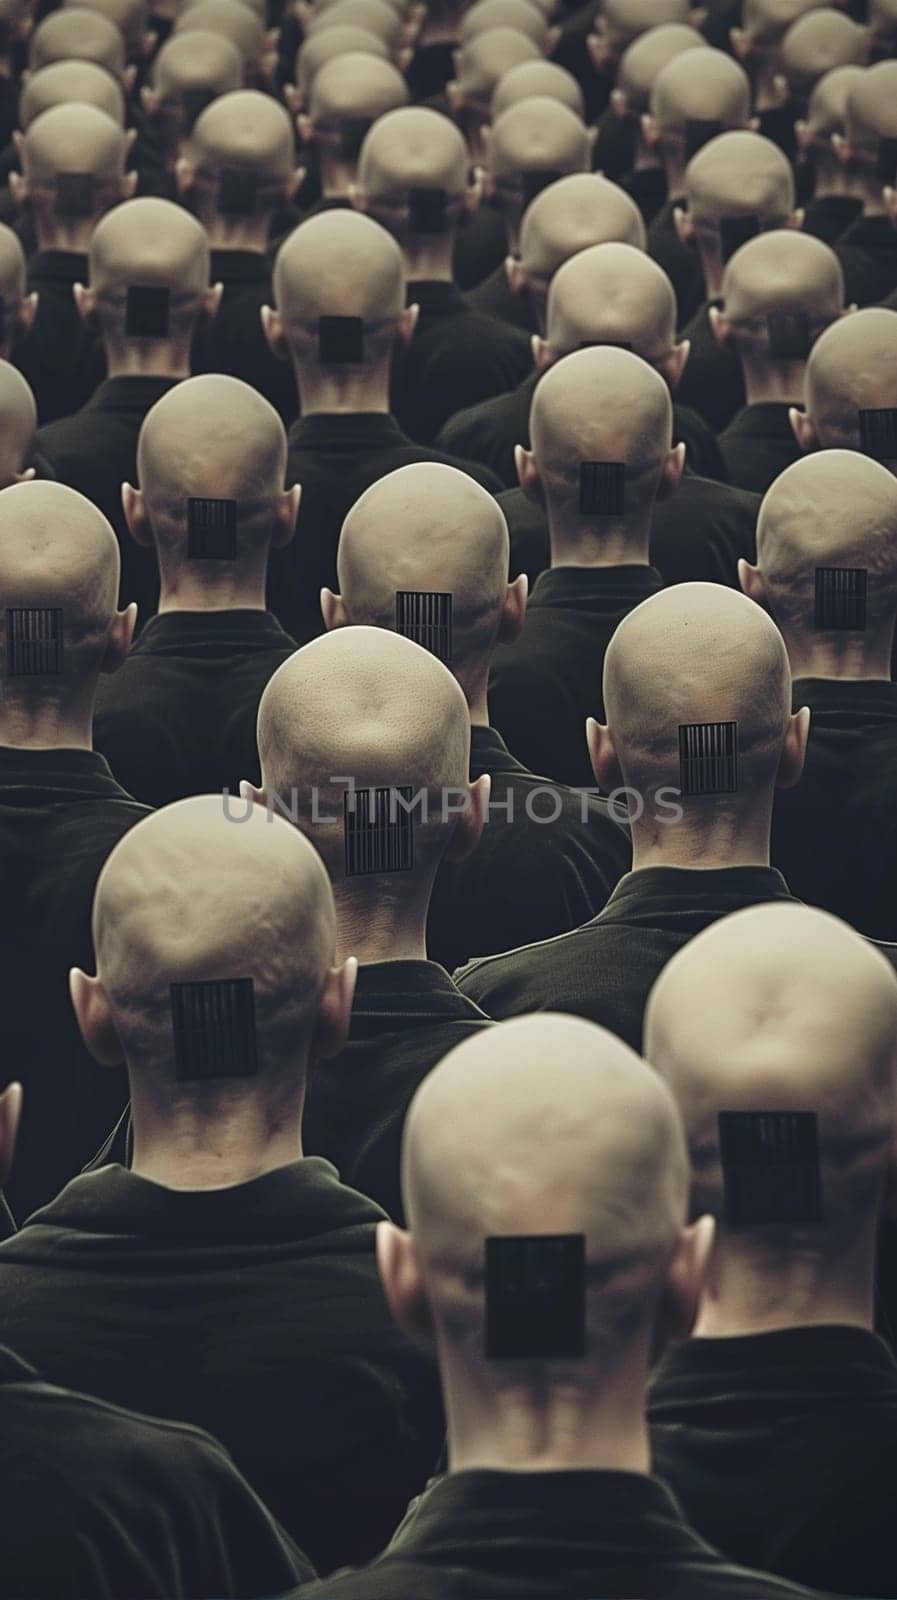 Uniformed Bald Figures With Barcodes on Their Heads Standing in Rows by Sd28DimoN_1976